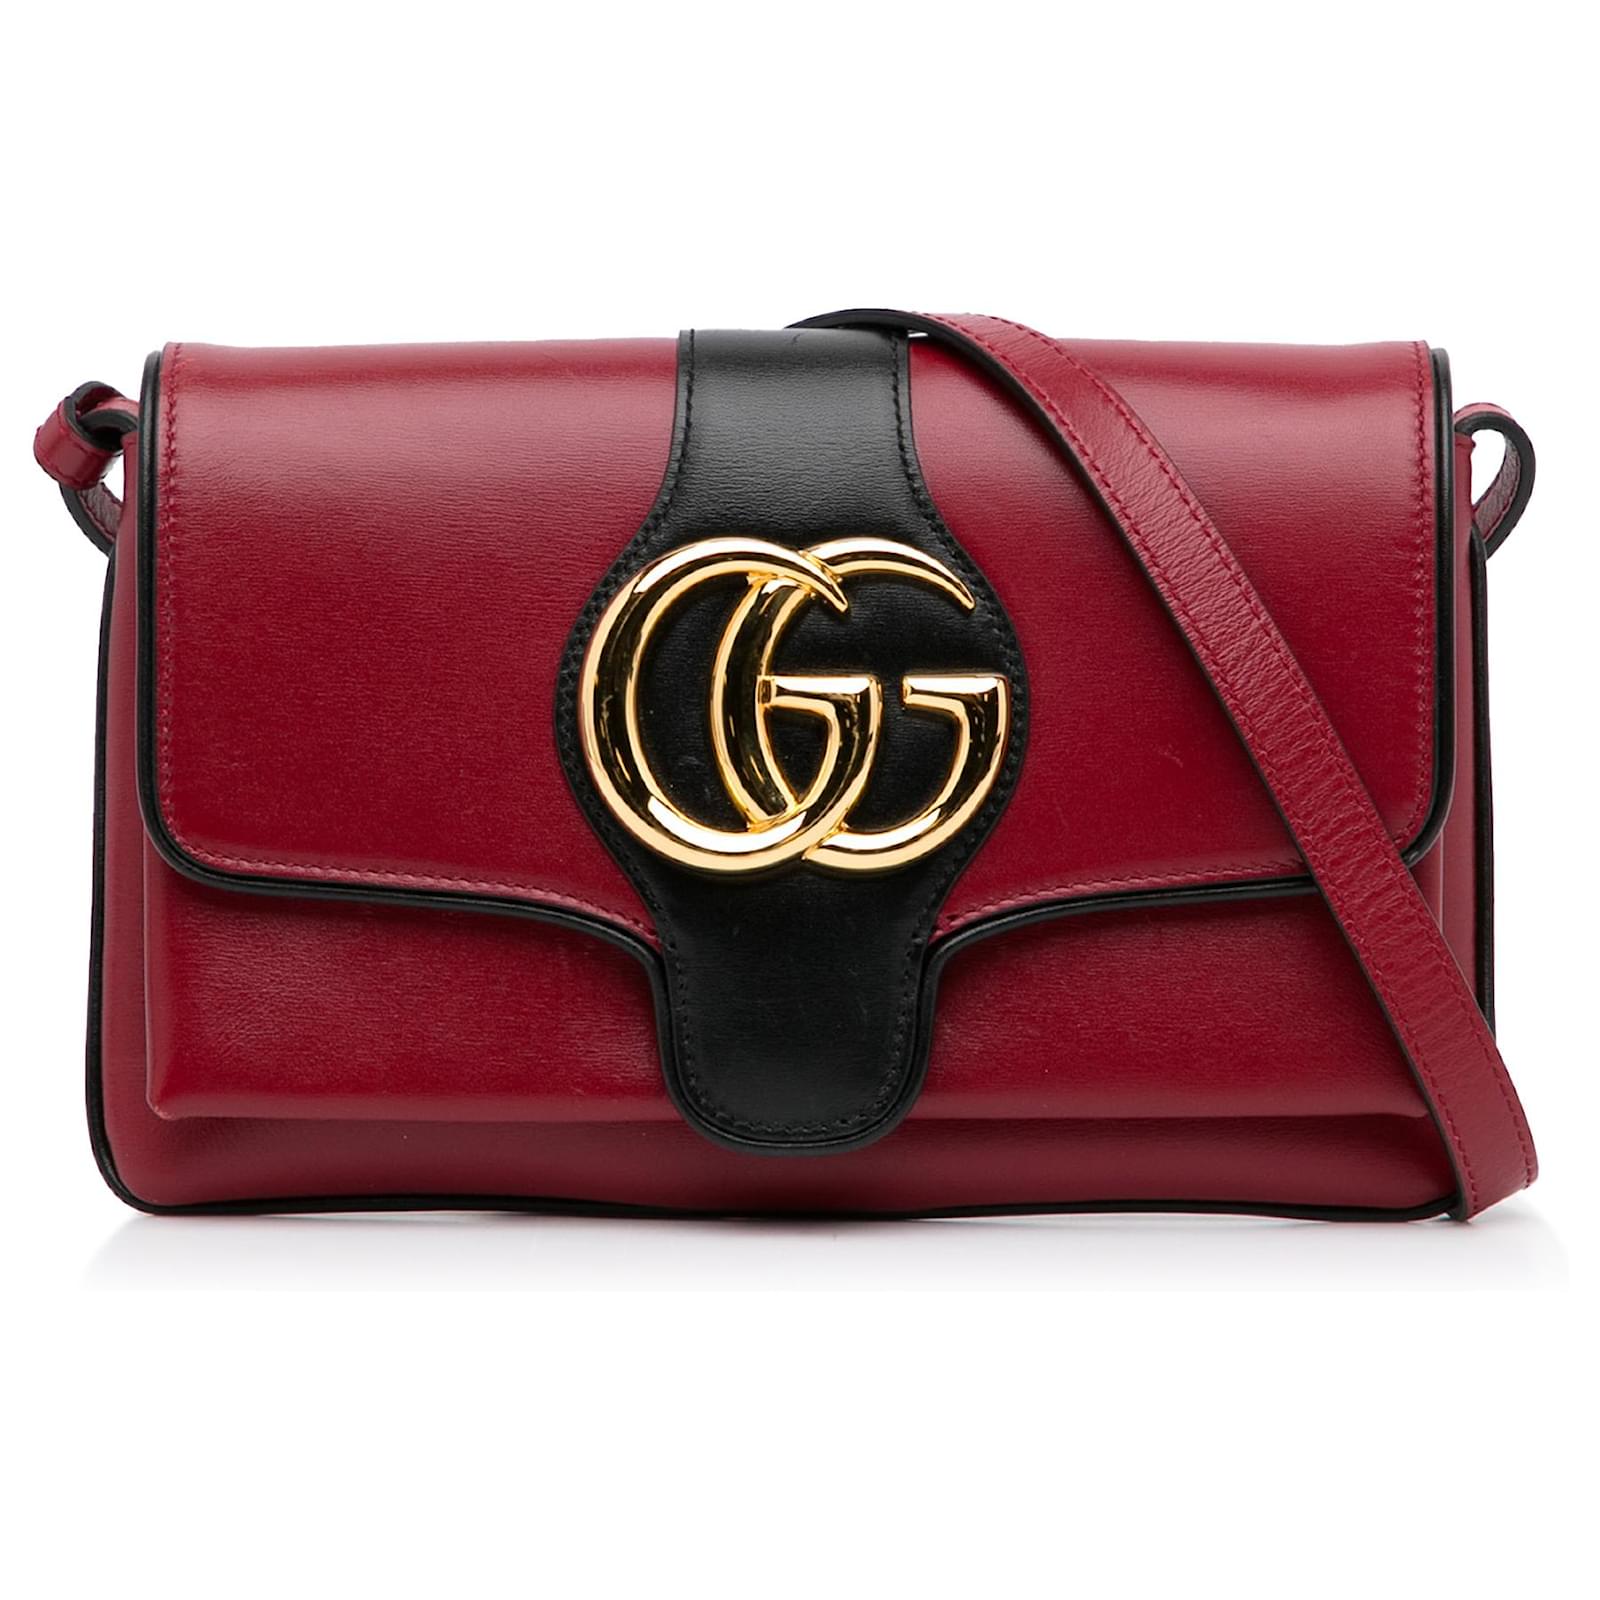 Gucci Arli Small Leather Shoulder Bag Red 550129